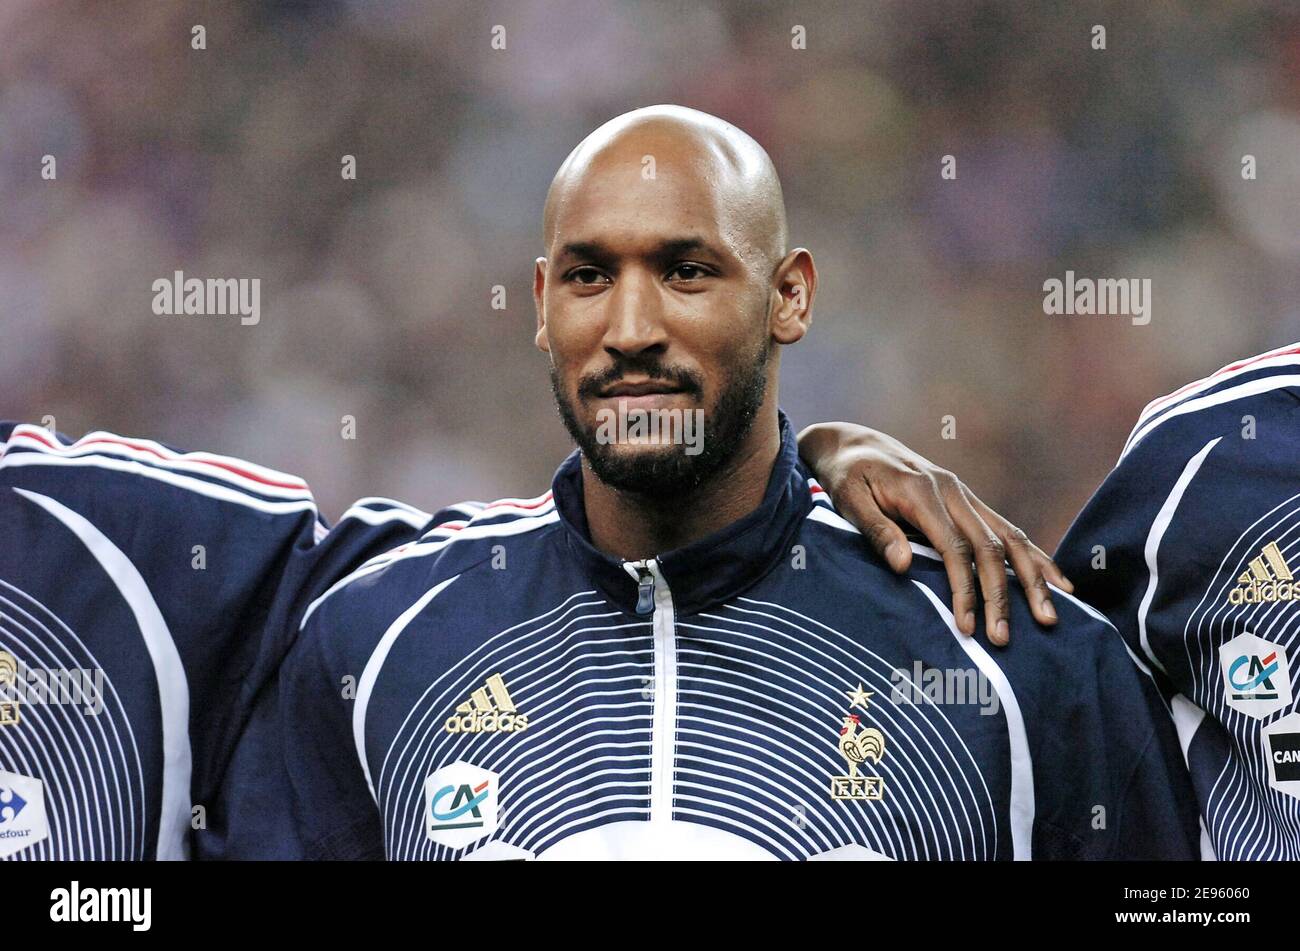 Frances Nicolas Anelka before the friendly football match France vs Slovakia as part of Frances Fifa World Cup warm-up, on March 01, 2006 at the Stade de France in Saint-Denis, northern Paris.